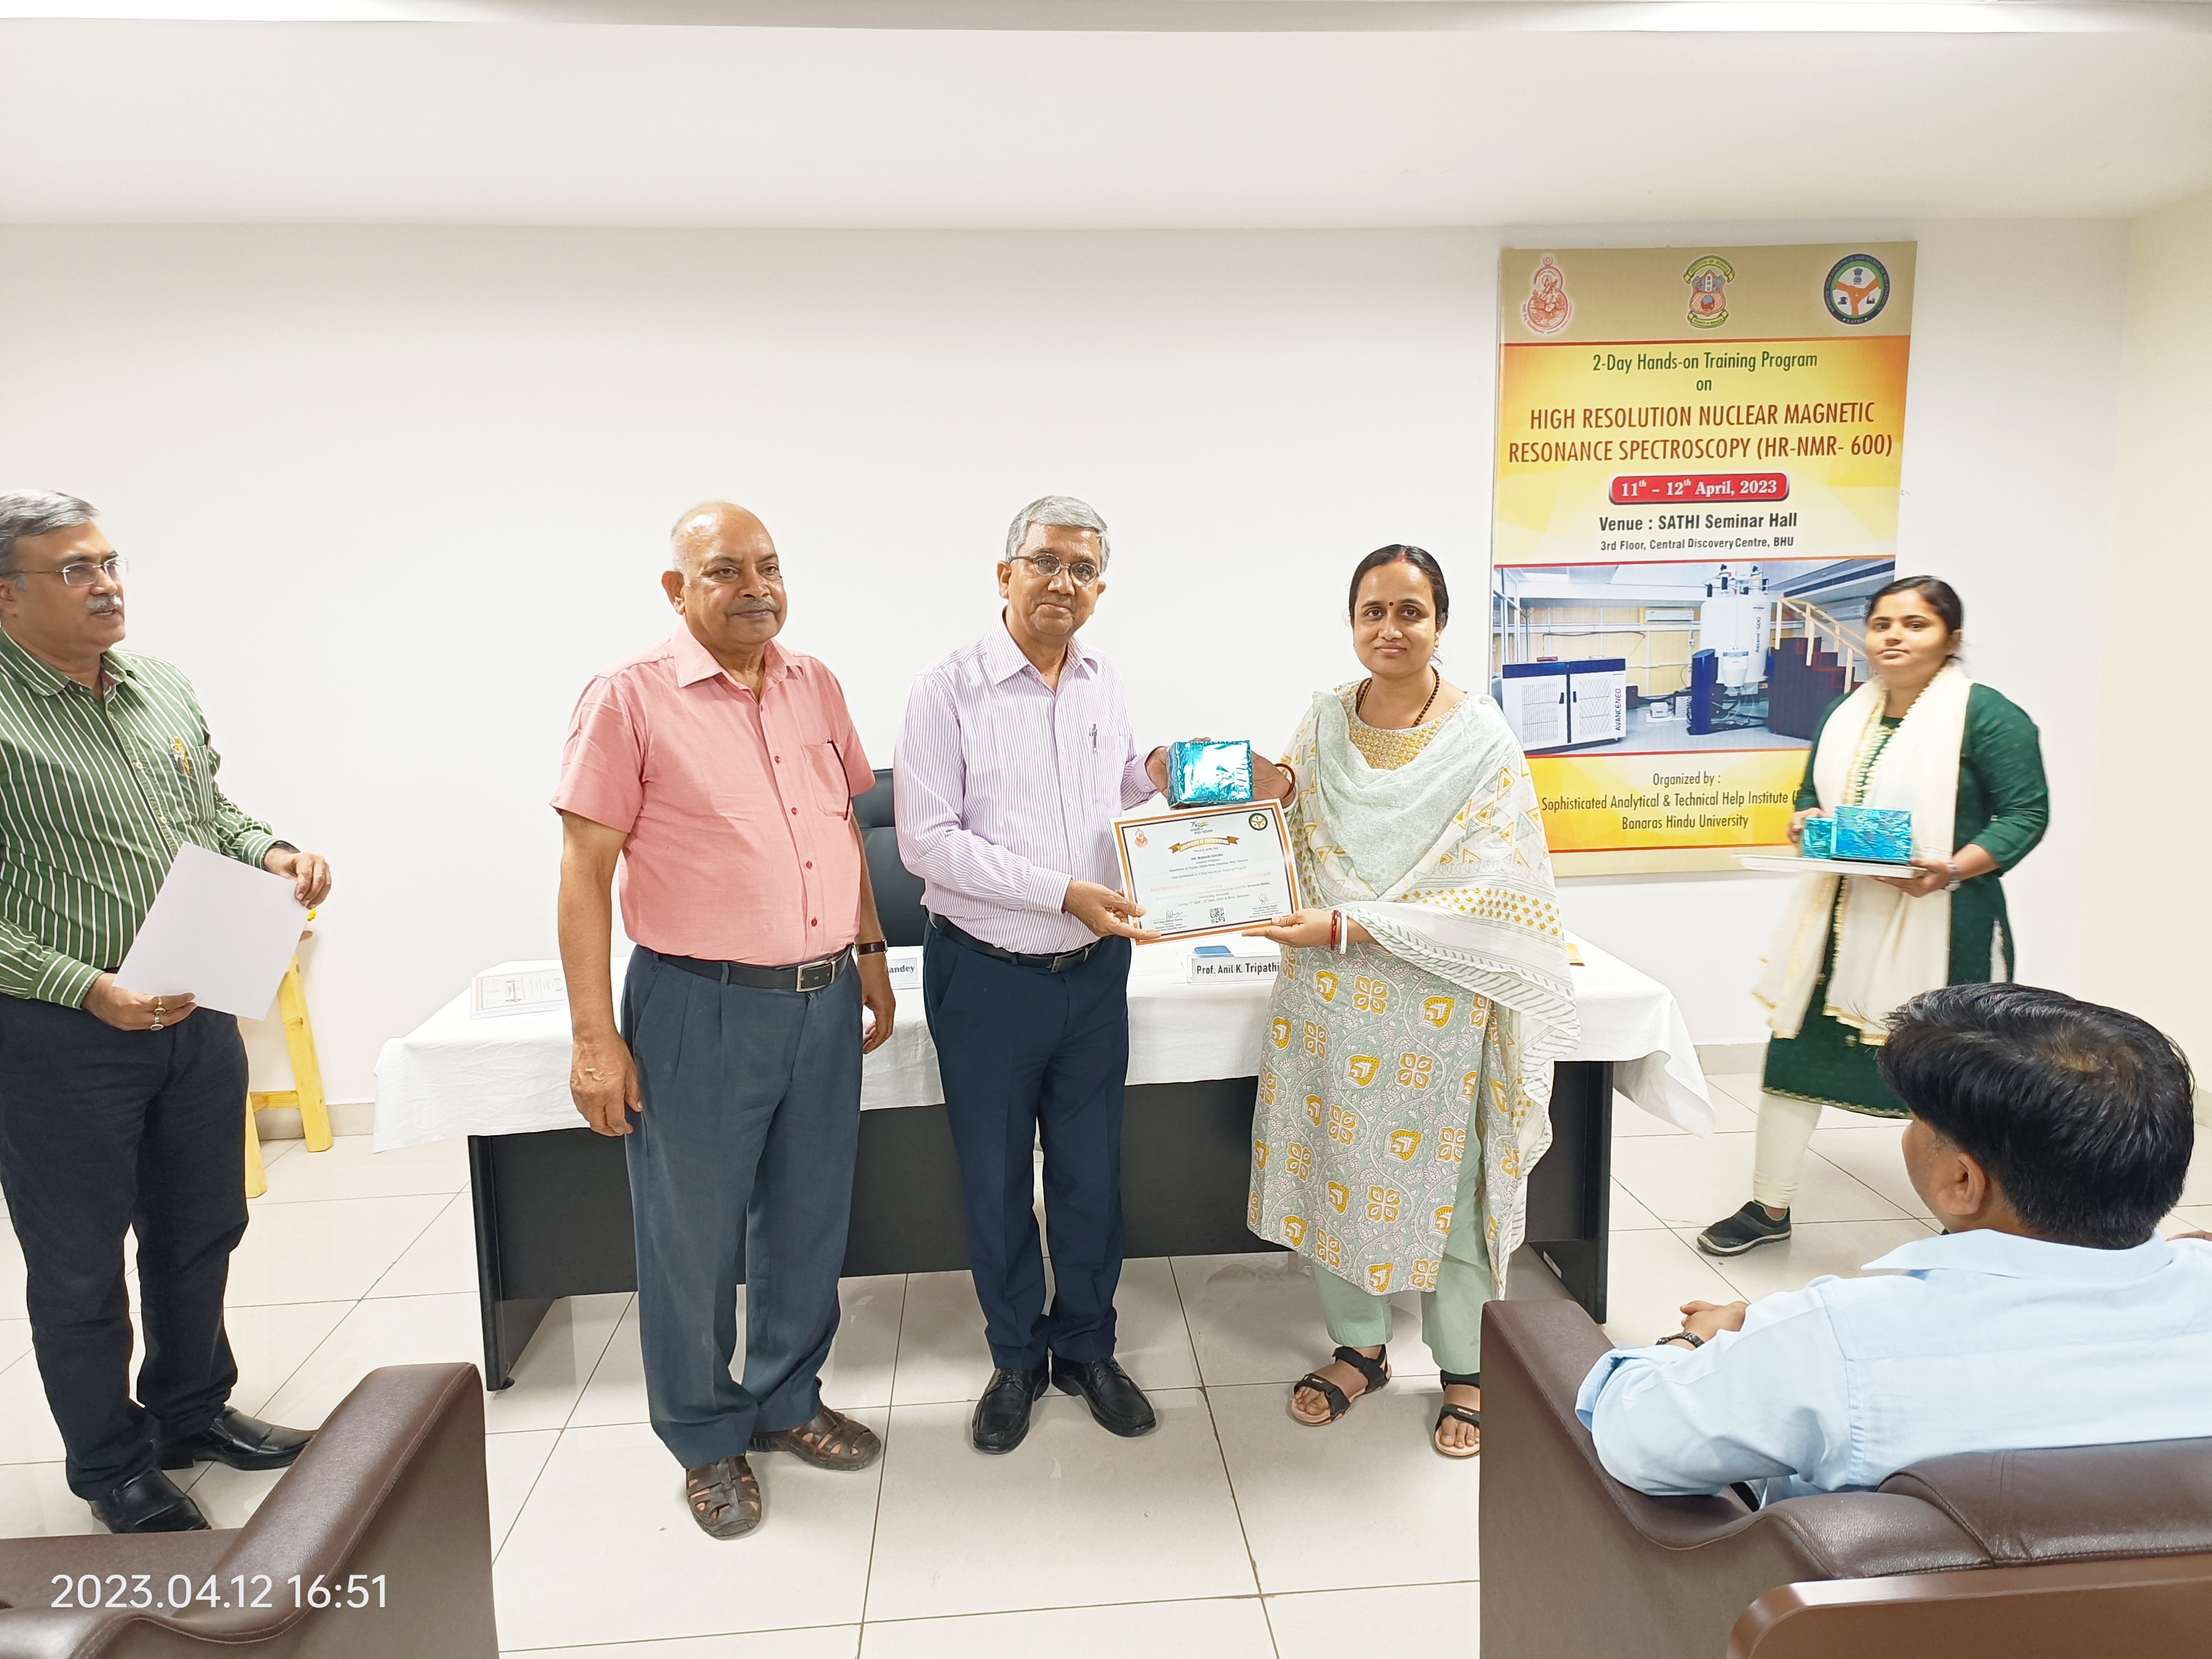 A token memento given to Dr. Manasi Ghosh for his contribution as a Resource person by Prof. Anil K. Tripathi, Coordinator, SATHI-BHU & Director, ISc, BHU 